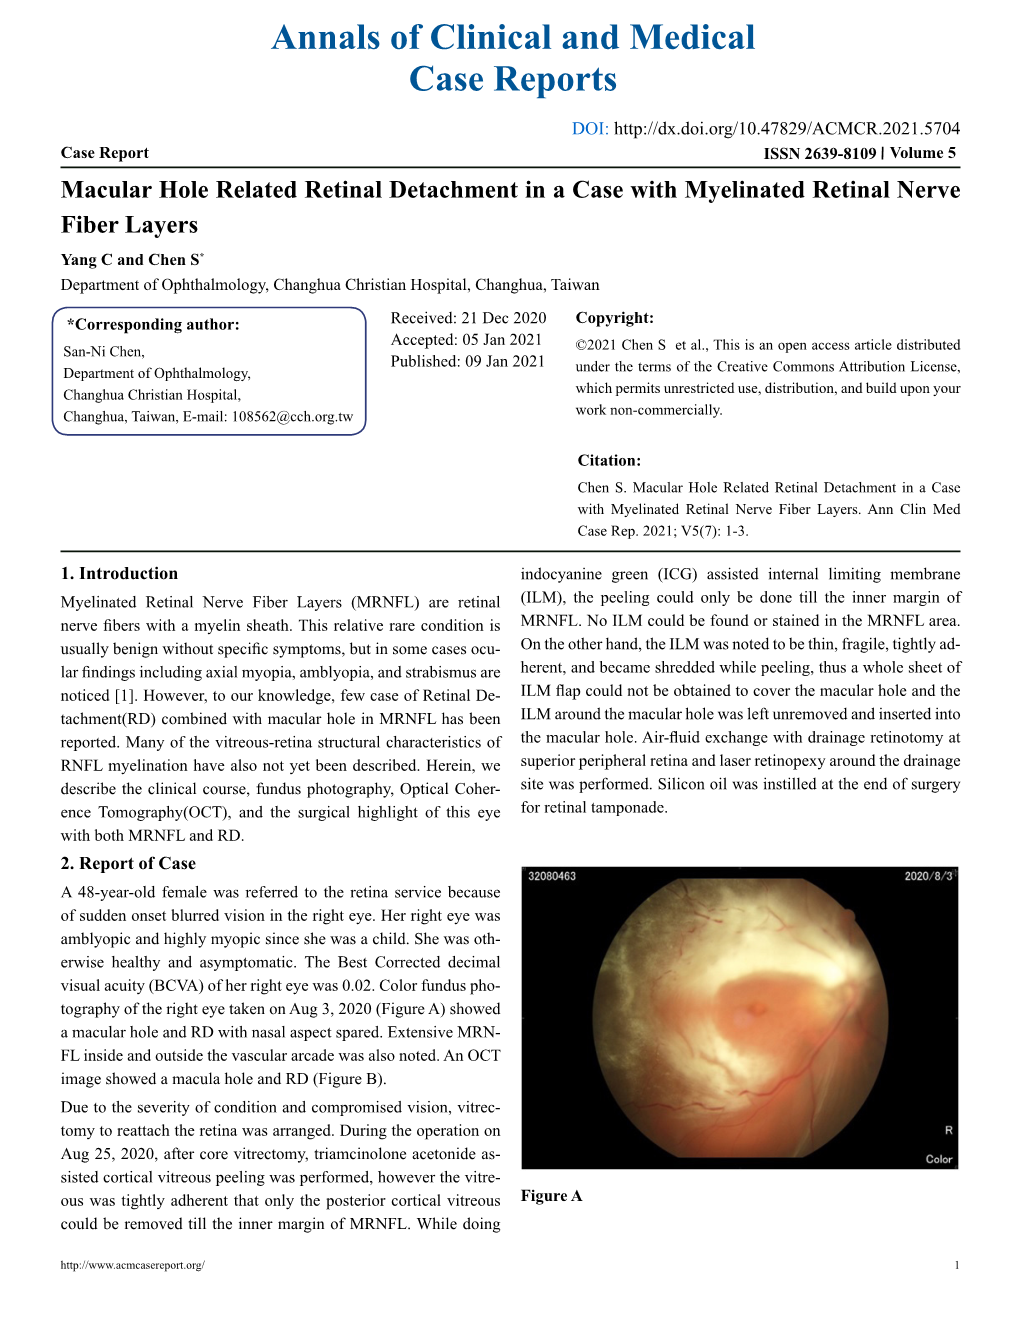 Macular Hole Related Retinal Detachment in a Case With